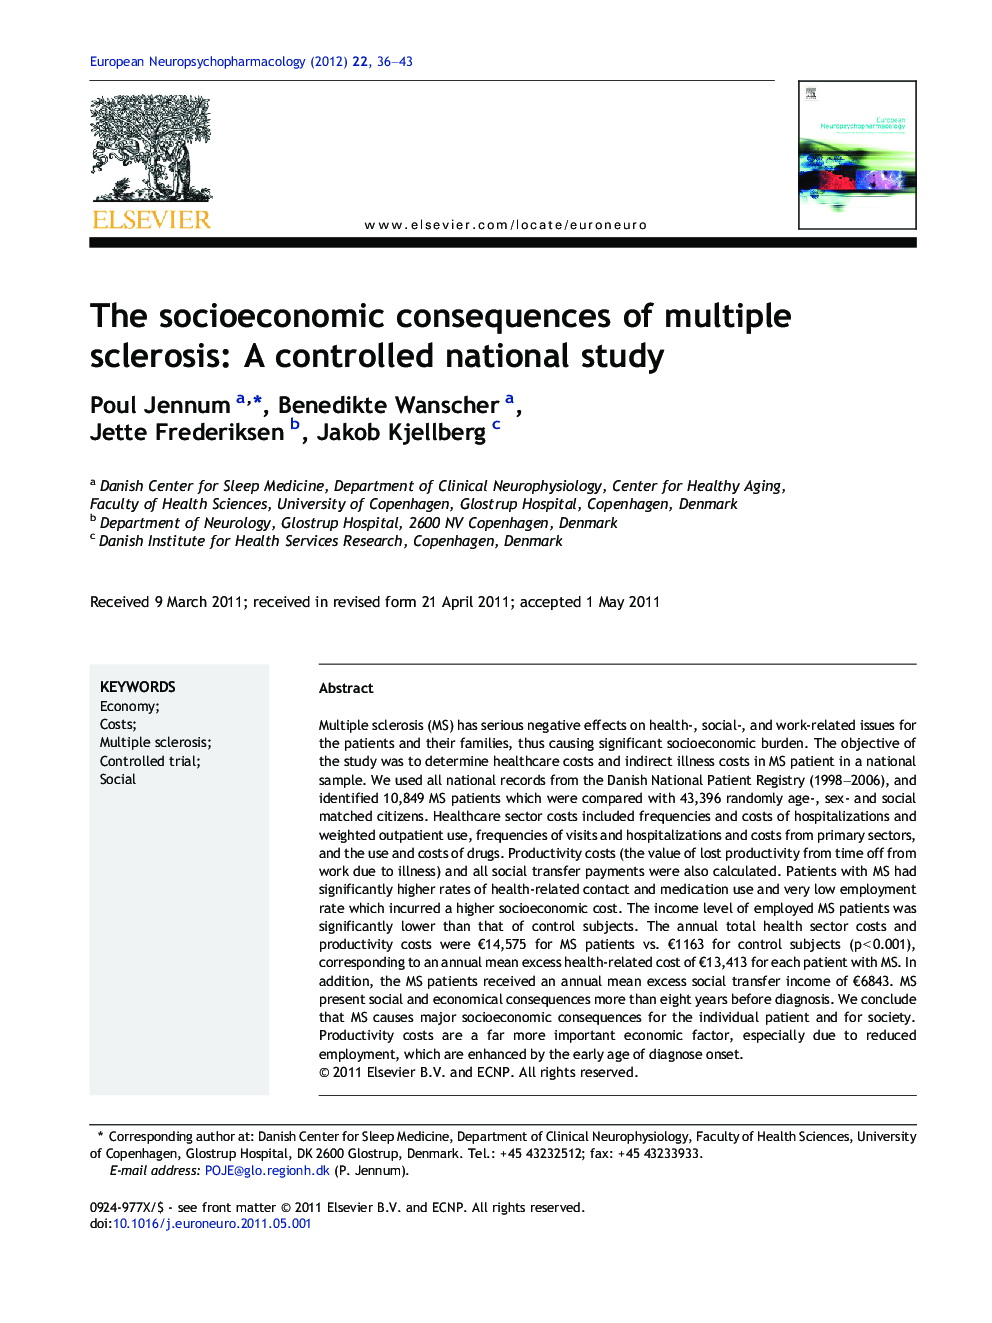 The socioeconomic consequences of multiple sclerosis: A controlled national study